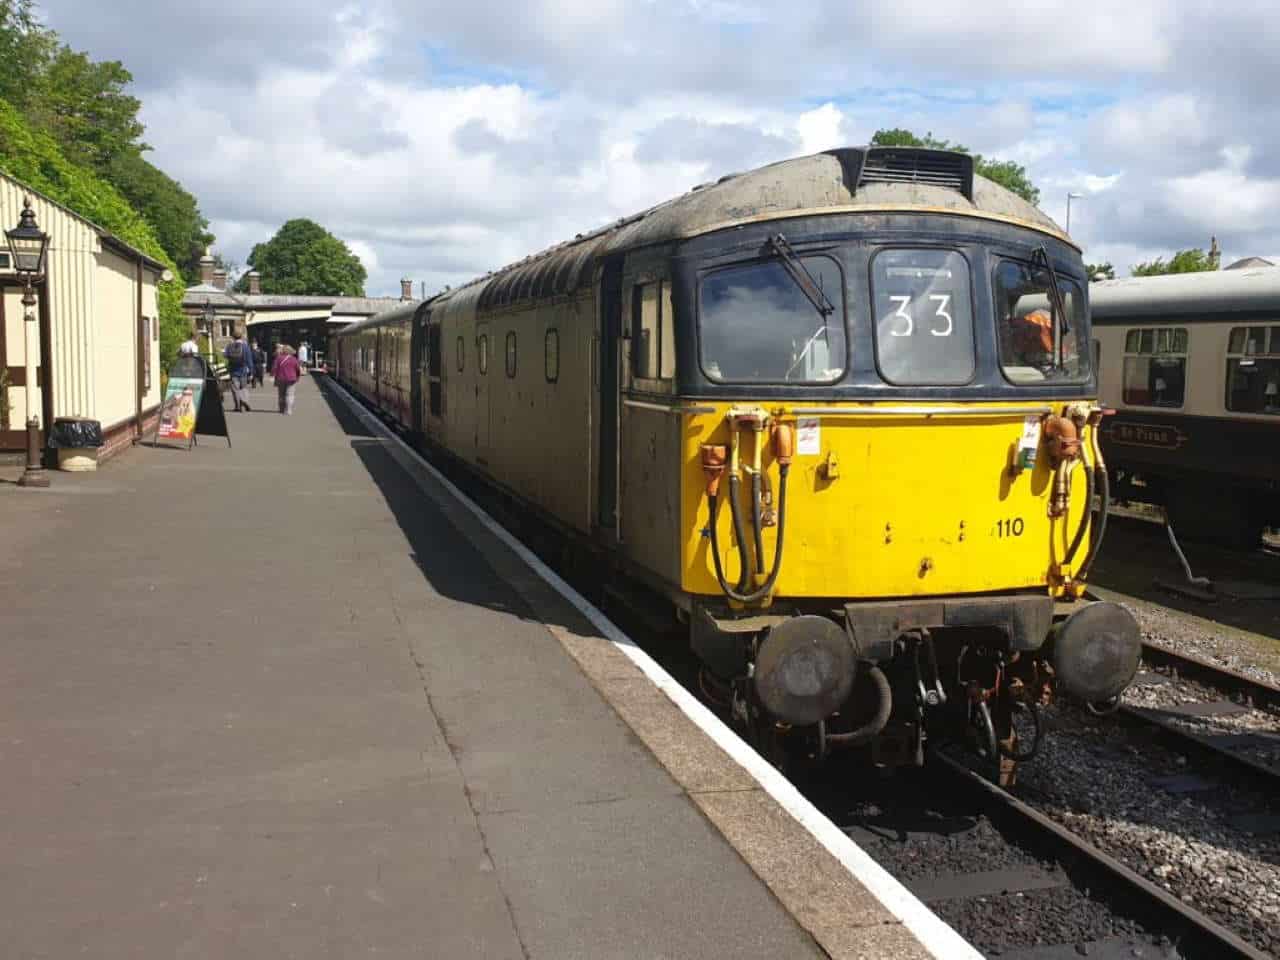 33110 at the Bodmin and Wenford Railway